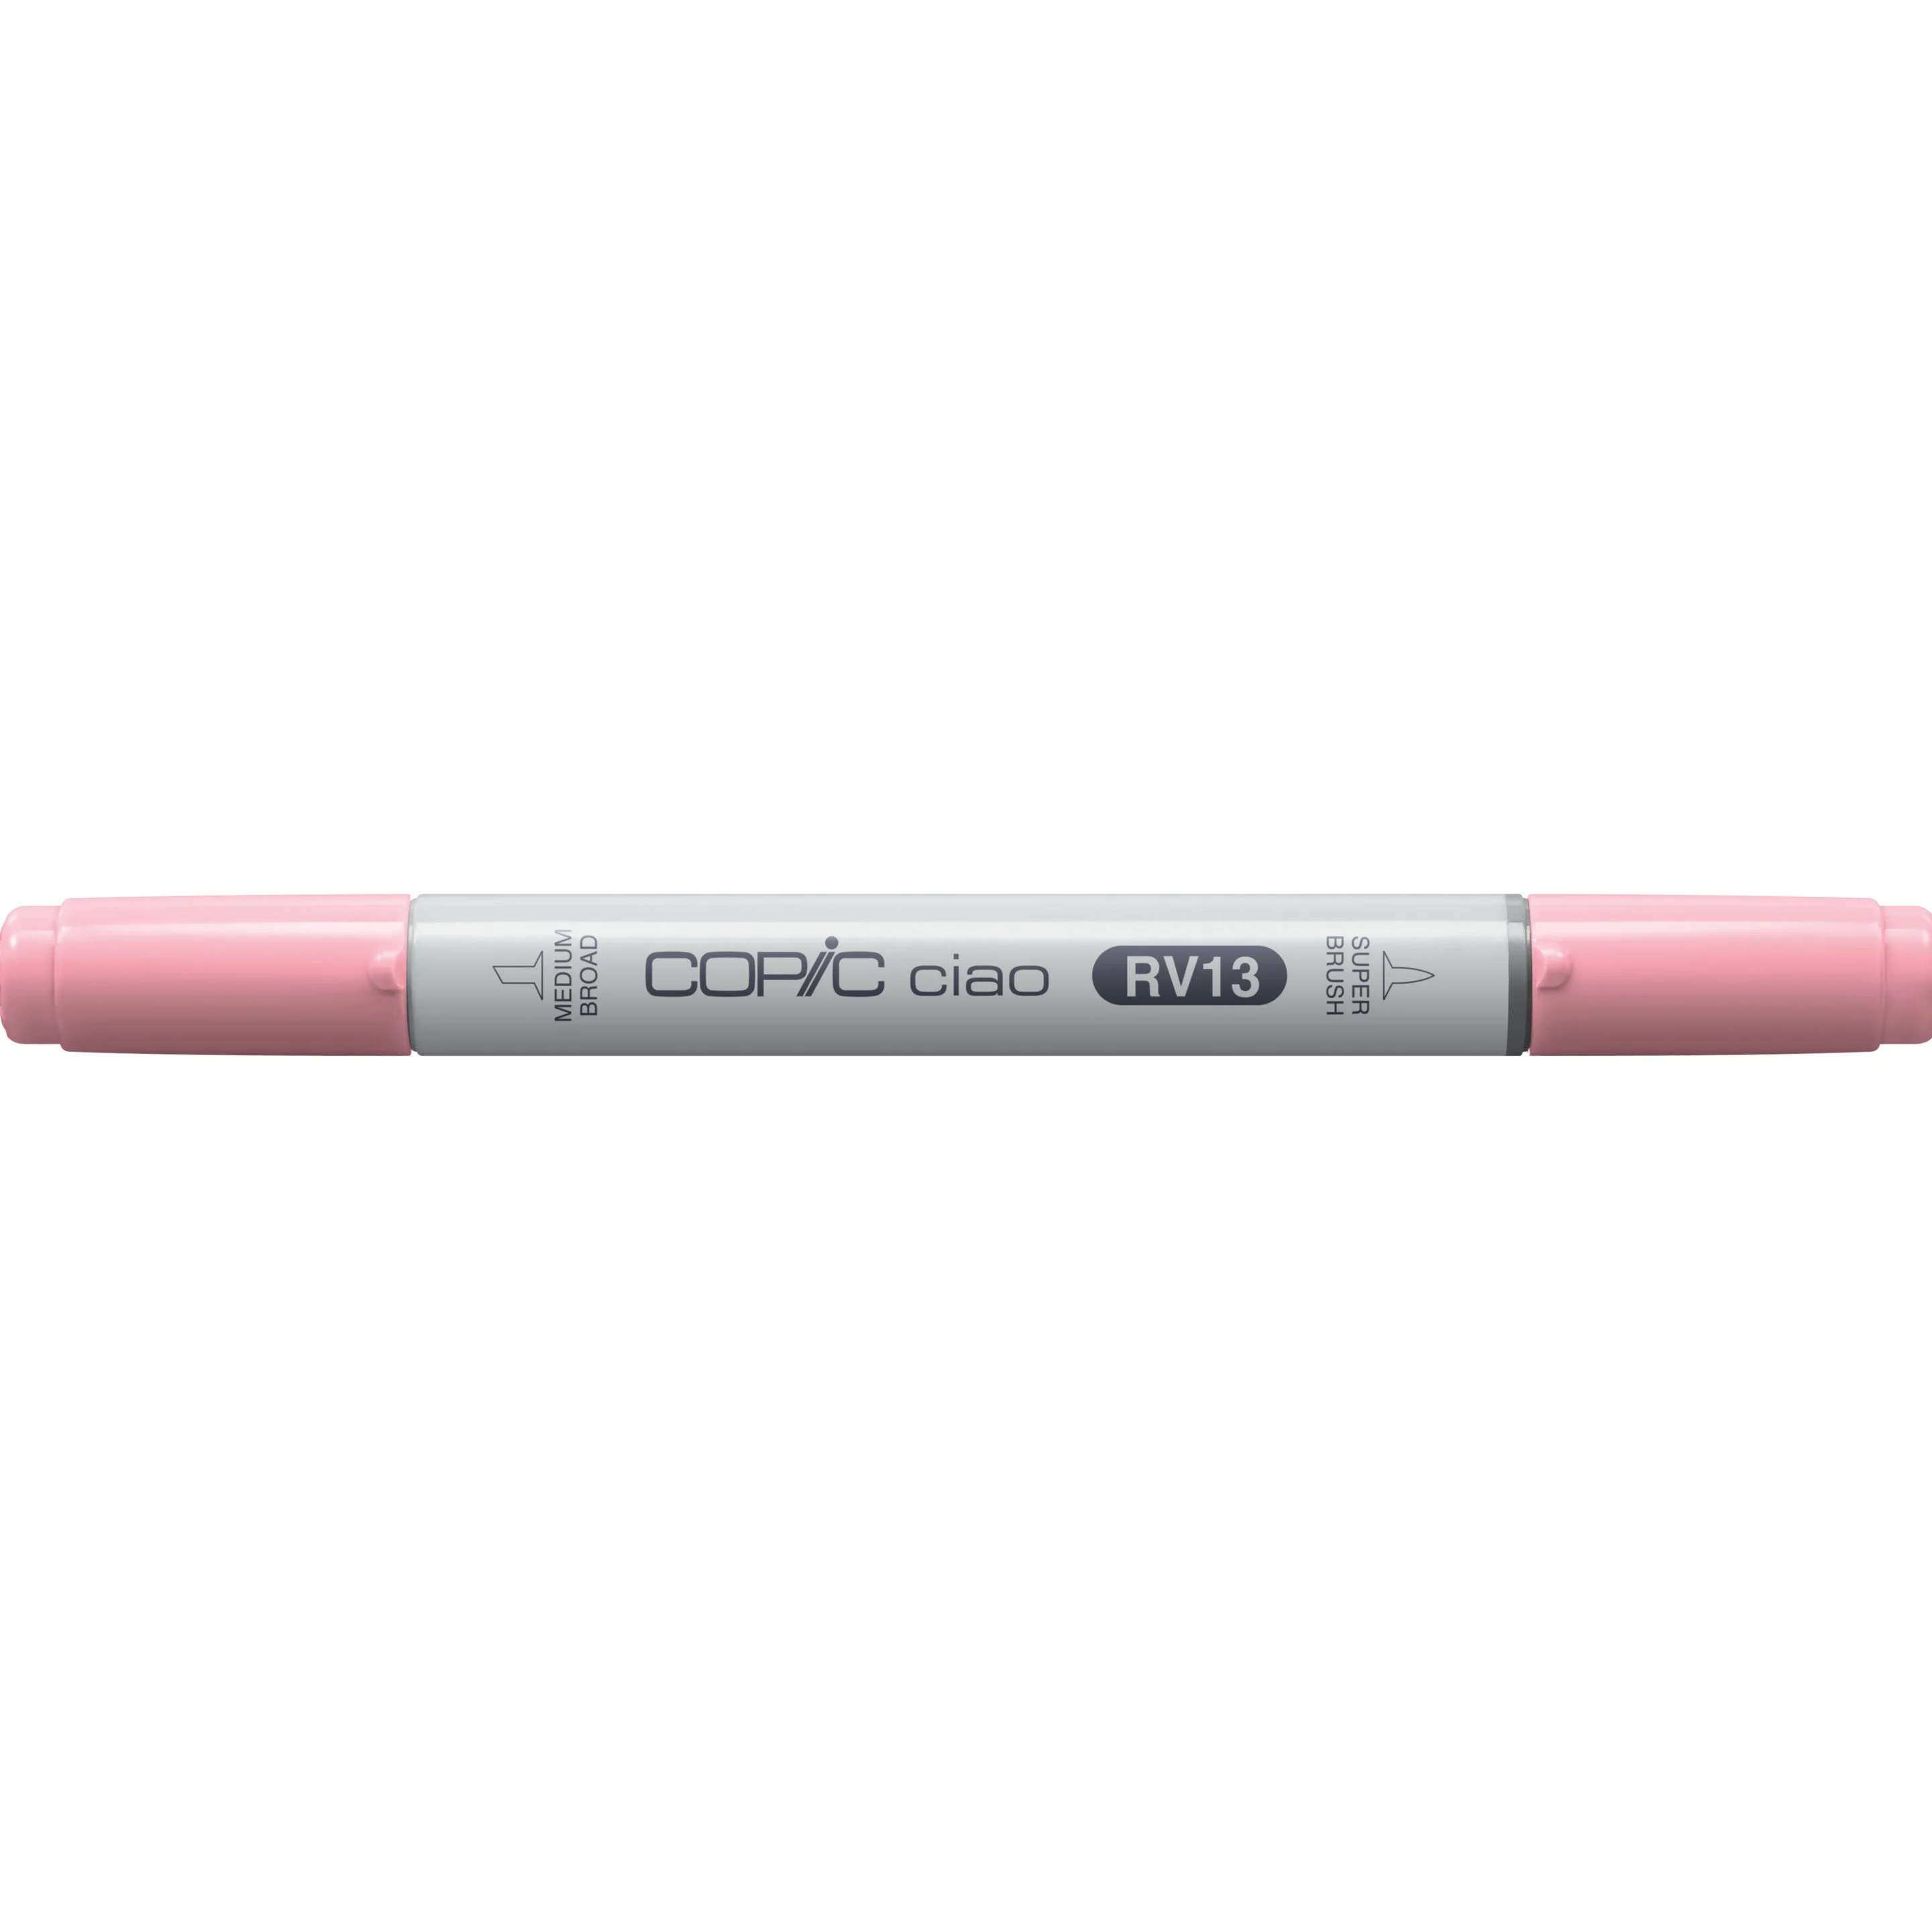 COPIC Marker Ciao 22075178 RV13 - Tender Pink